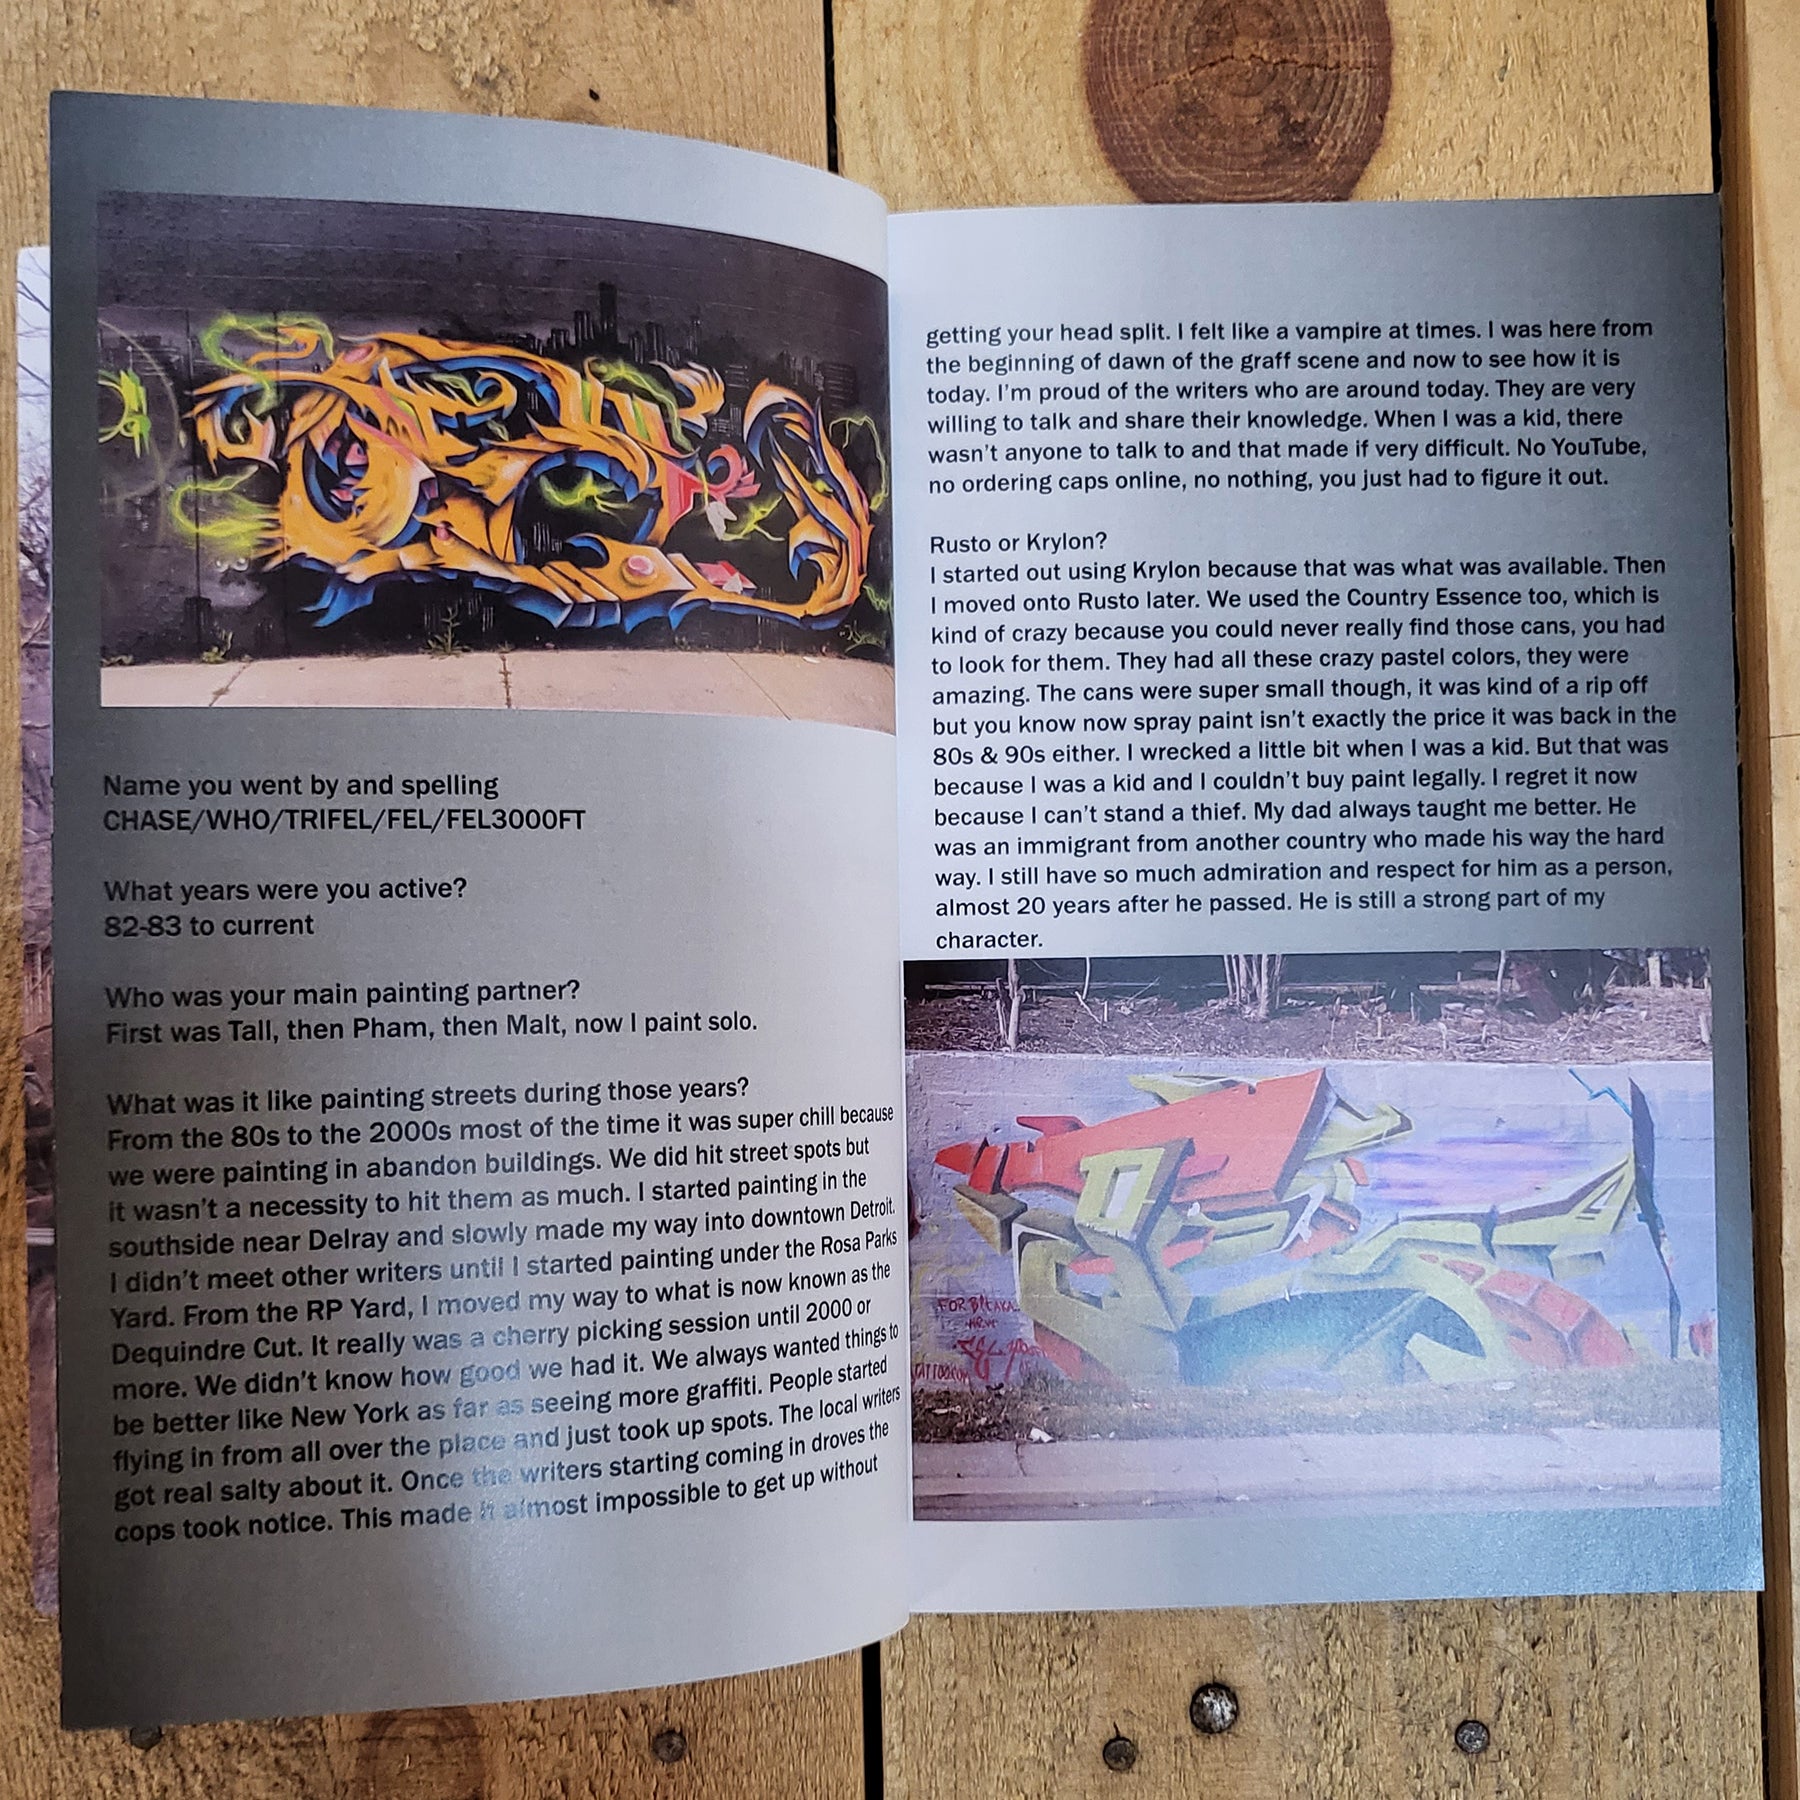 An open magazine, the left page shows a photo of a graffiti piece with an interview written underneath. The right page shows a photo of graffiti at the bottom with the continued interview at the top.